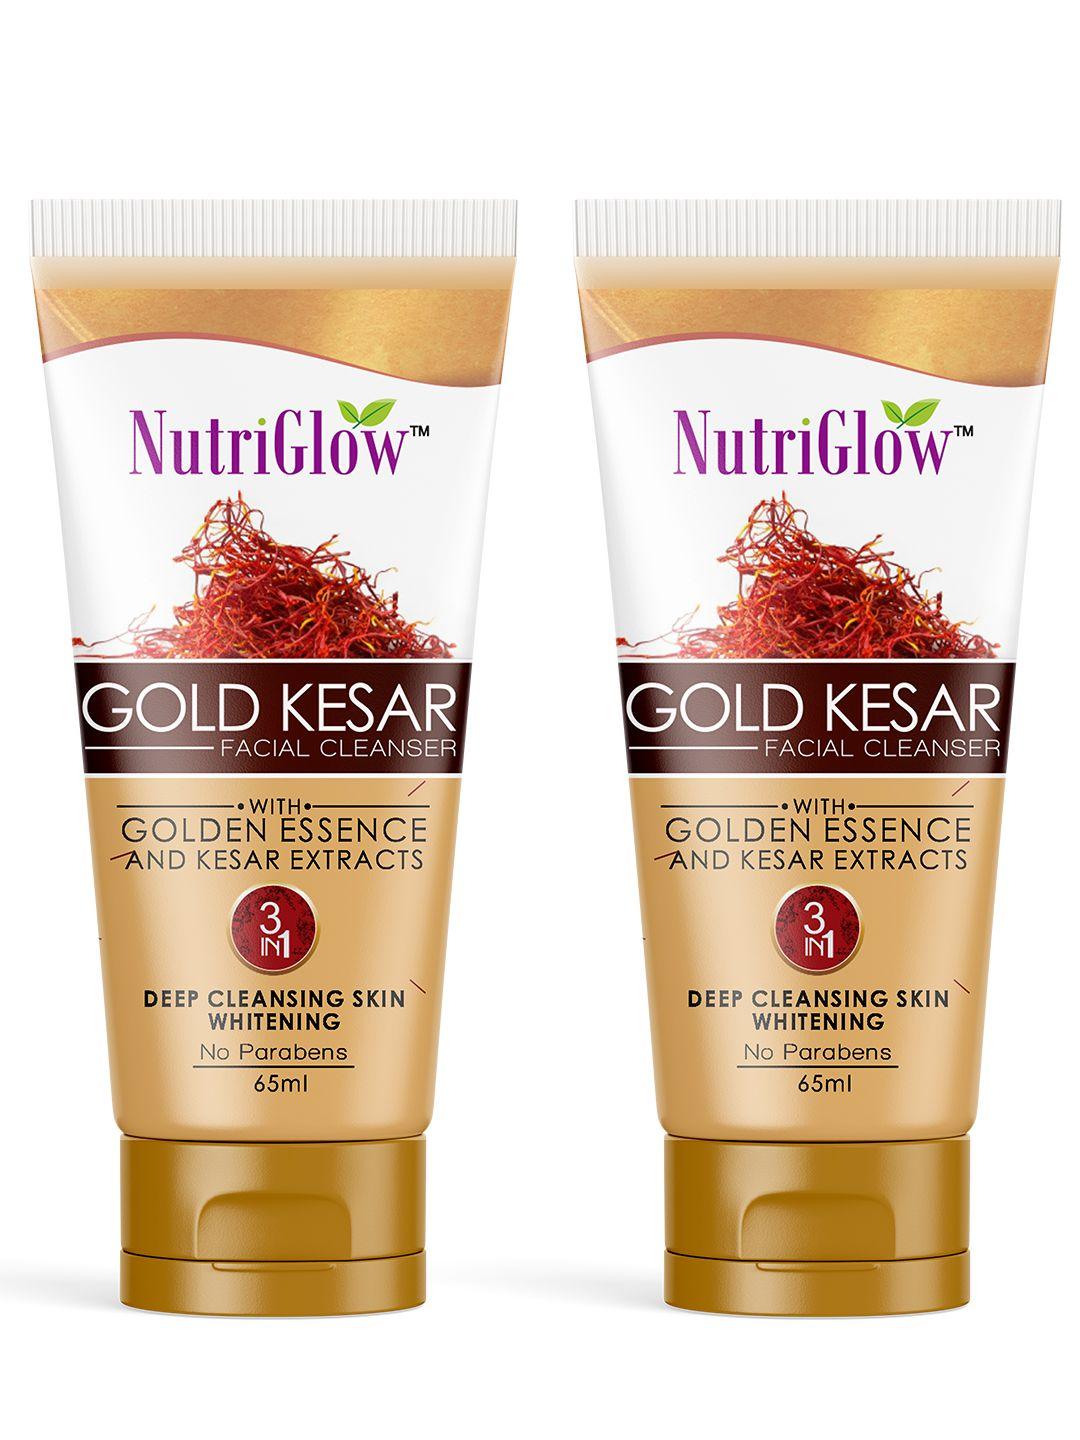 nutriglow set of 2 gold kesar sustainable sustainable face wash 130ml